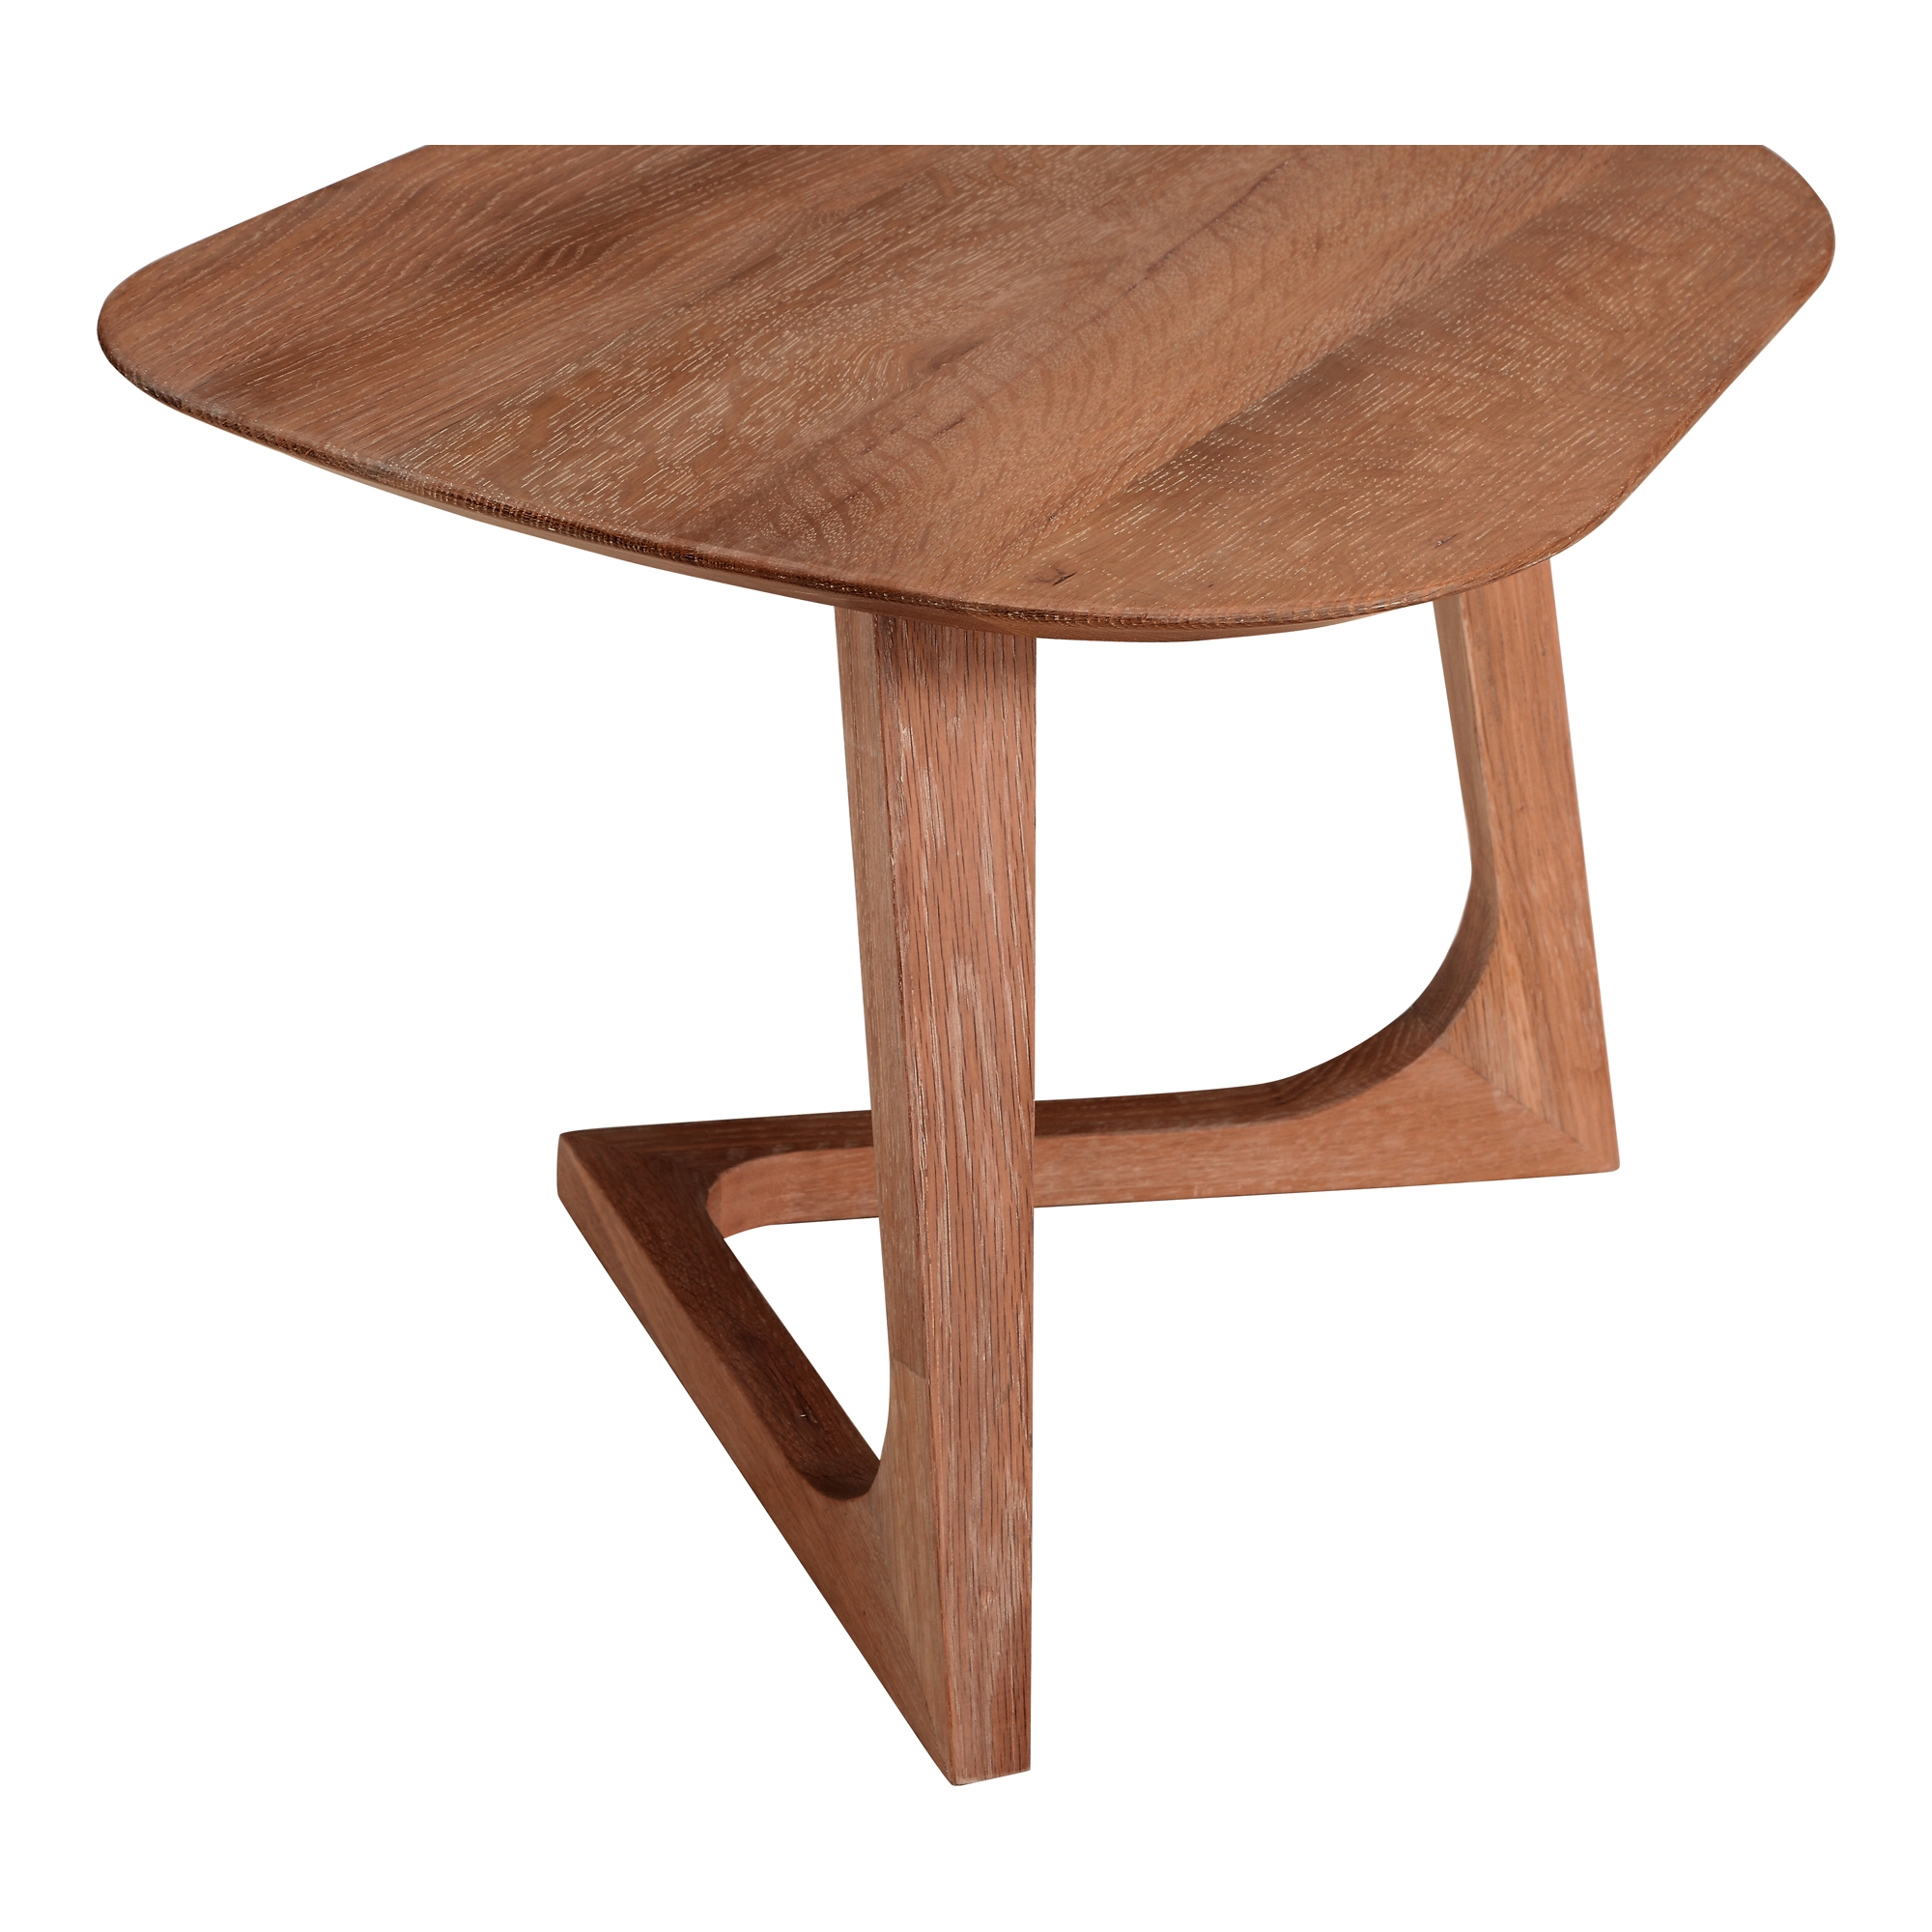 Godenza End Table Brown - Image 6